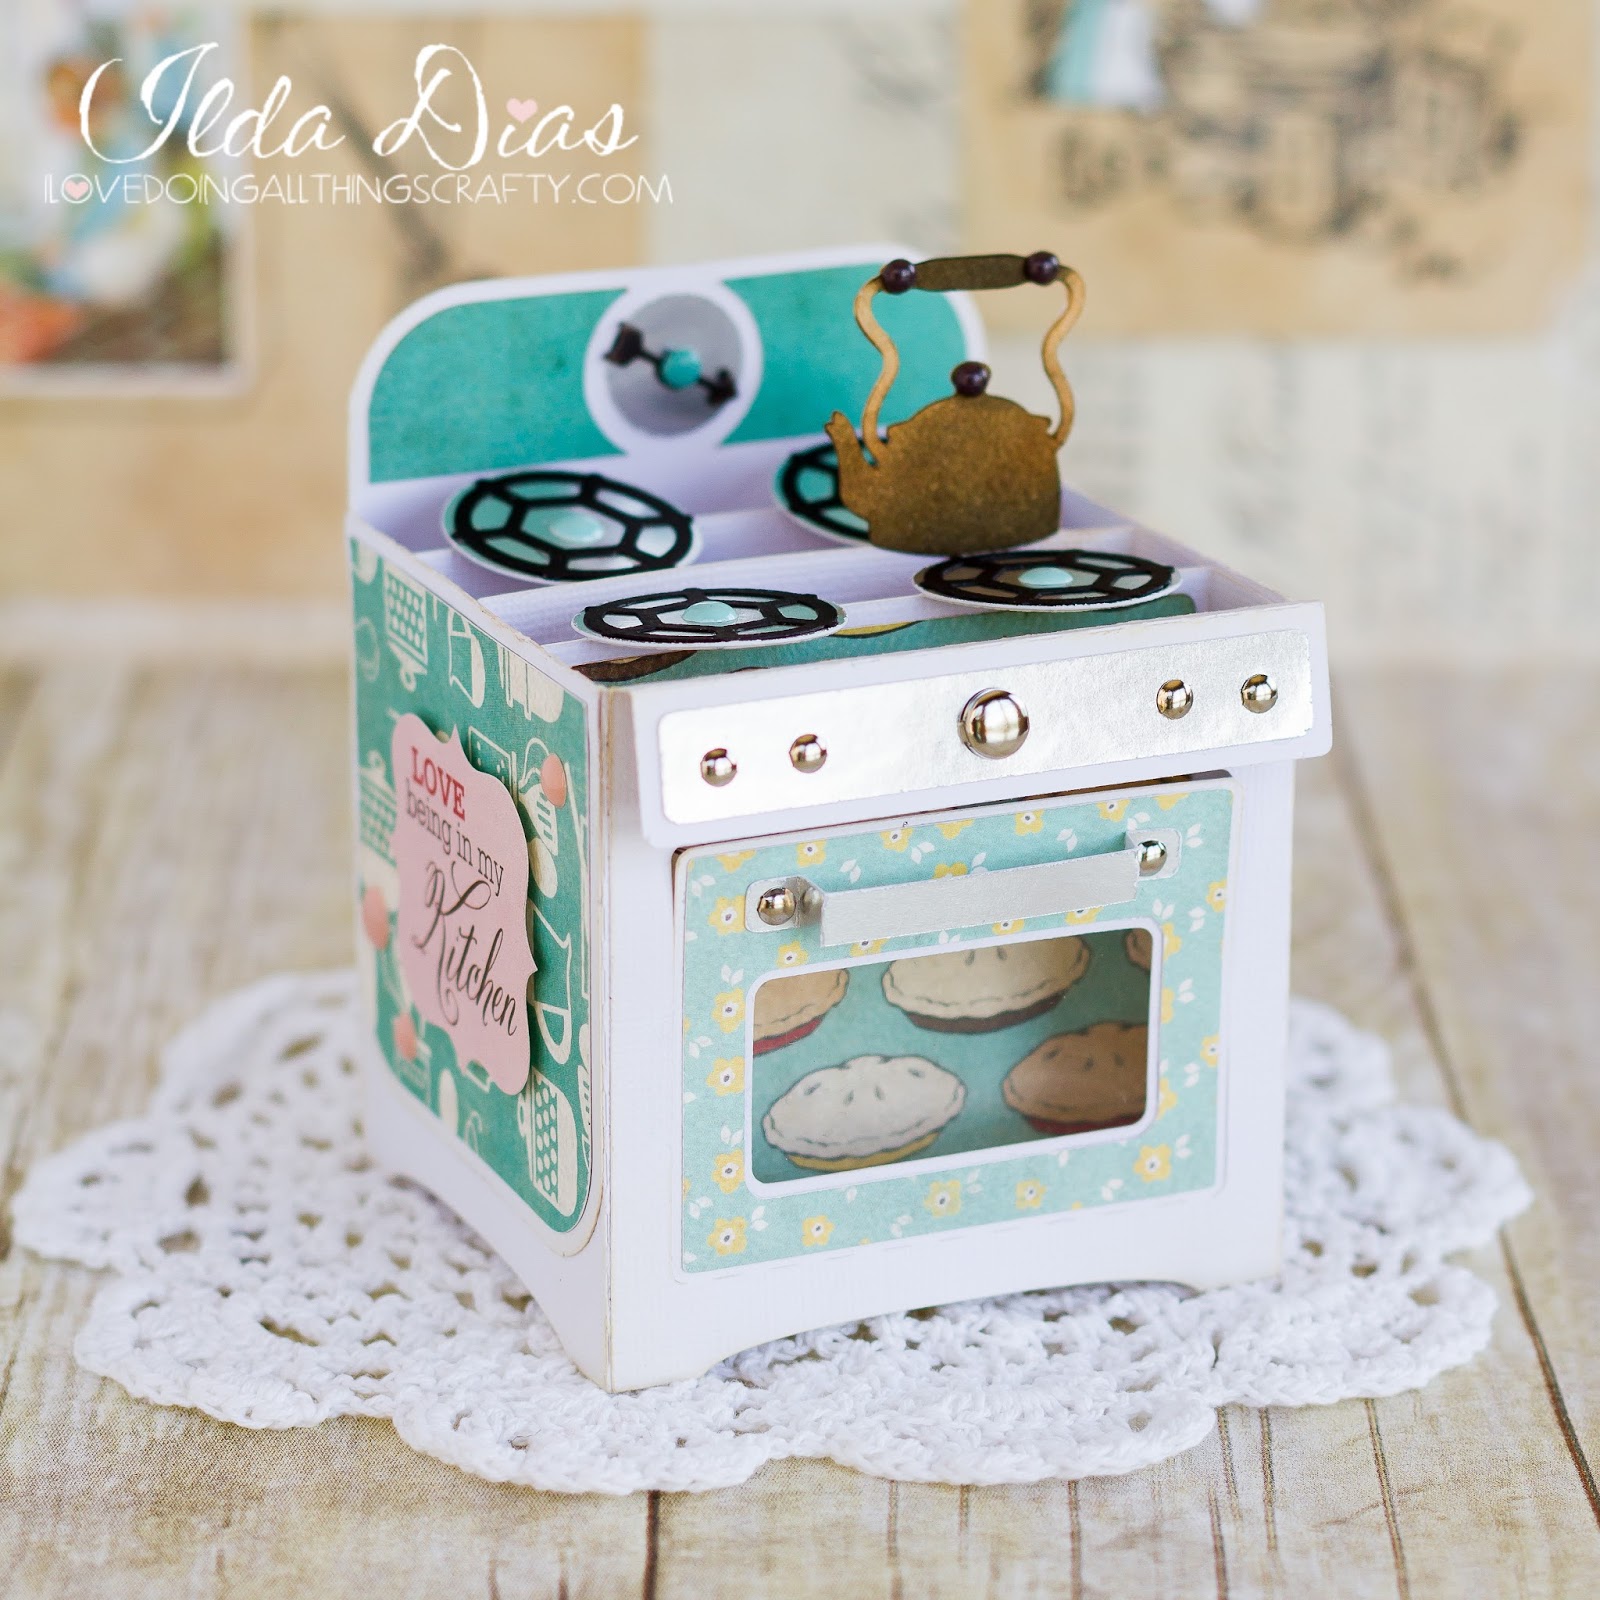 Download I Love Doing All Things Crafty: Mother's Day Retro Oven Box Card